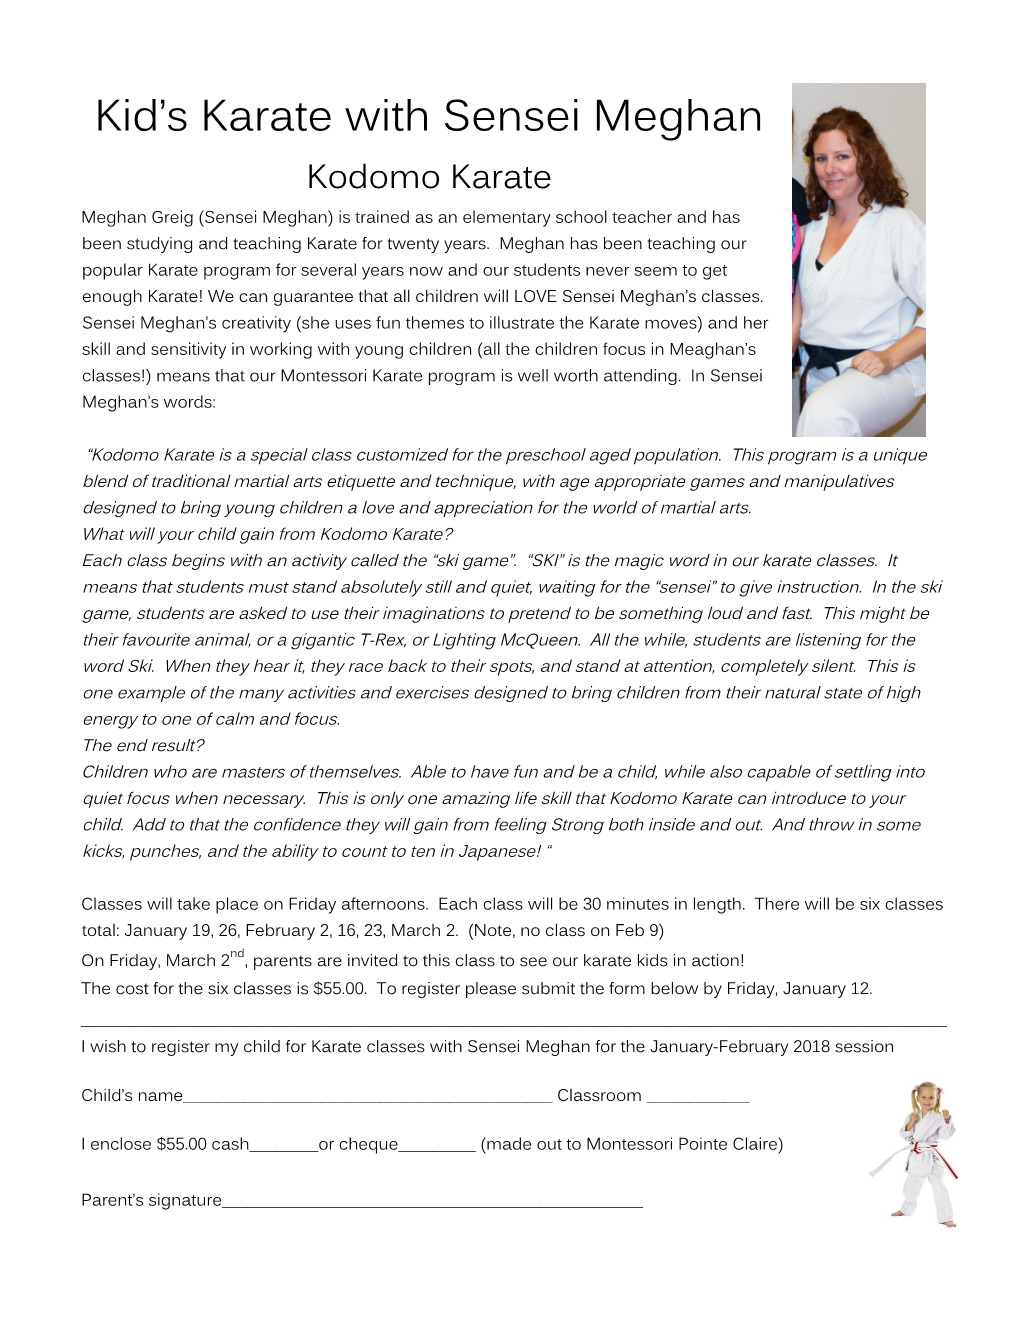 What Will Your Child Gain from Kodomo Karate?